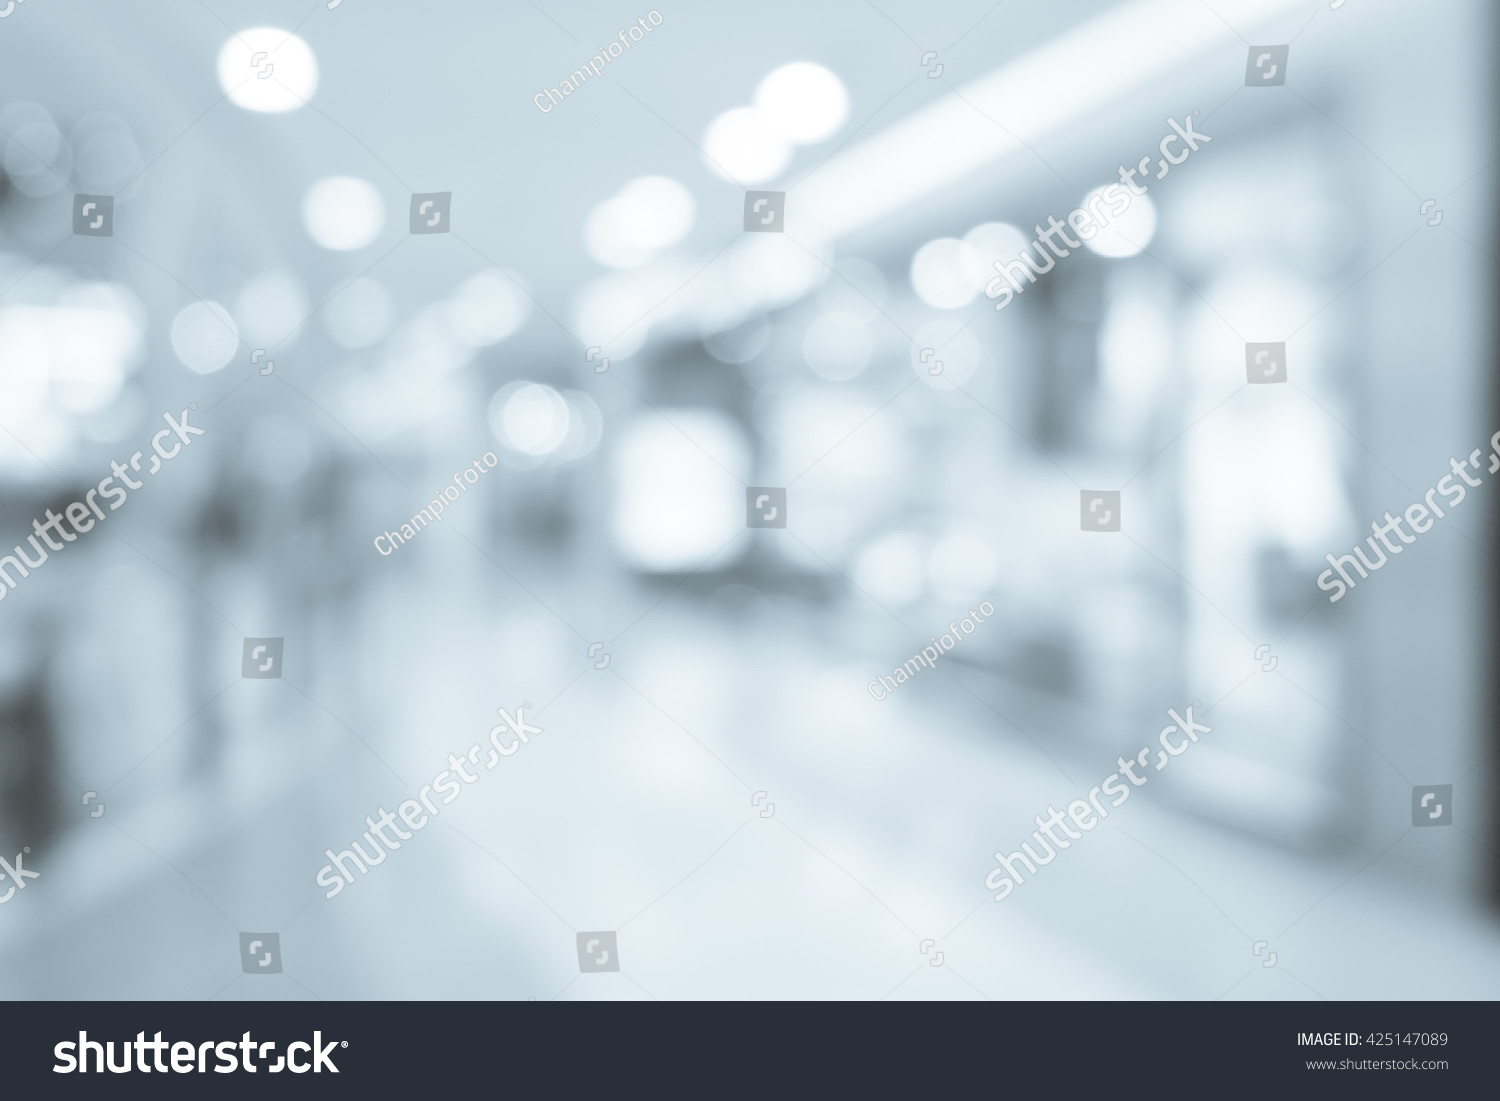 Abstract background blur of shopping mall #425147089